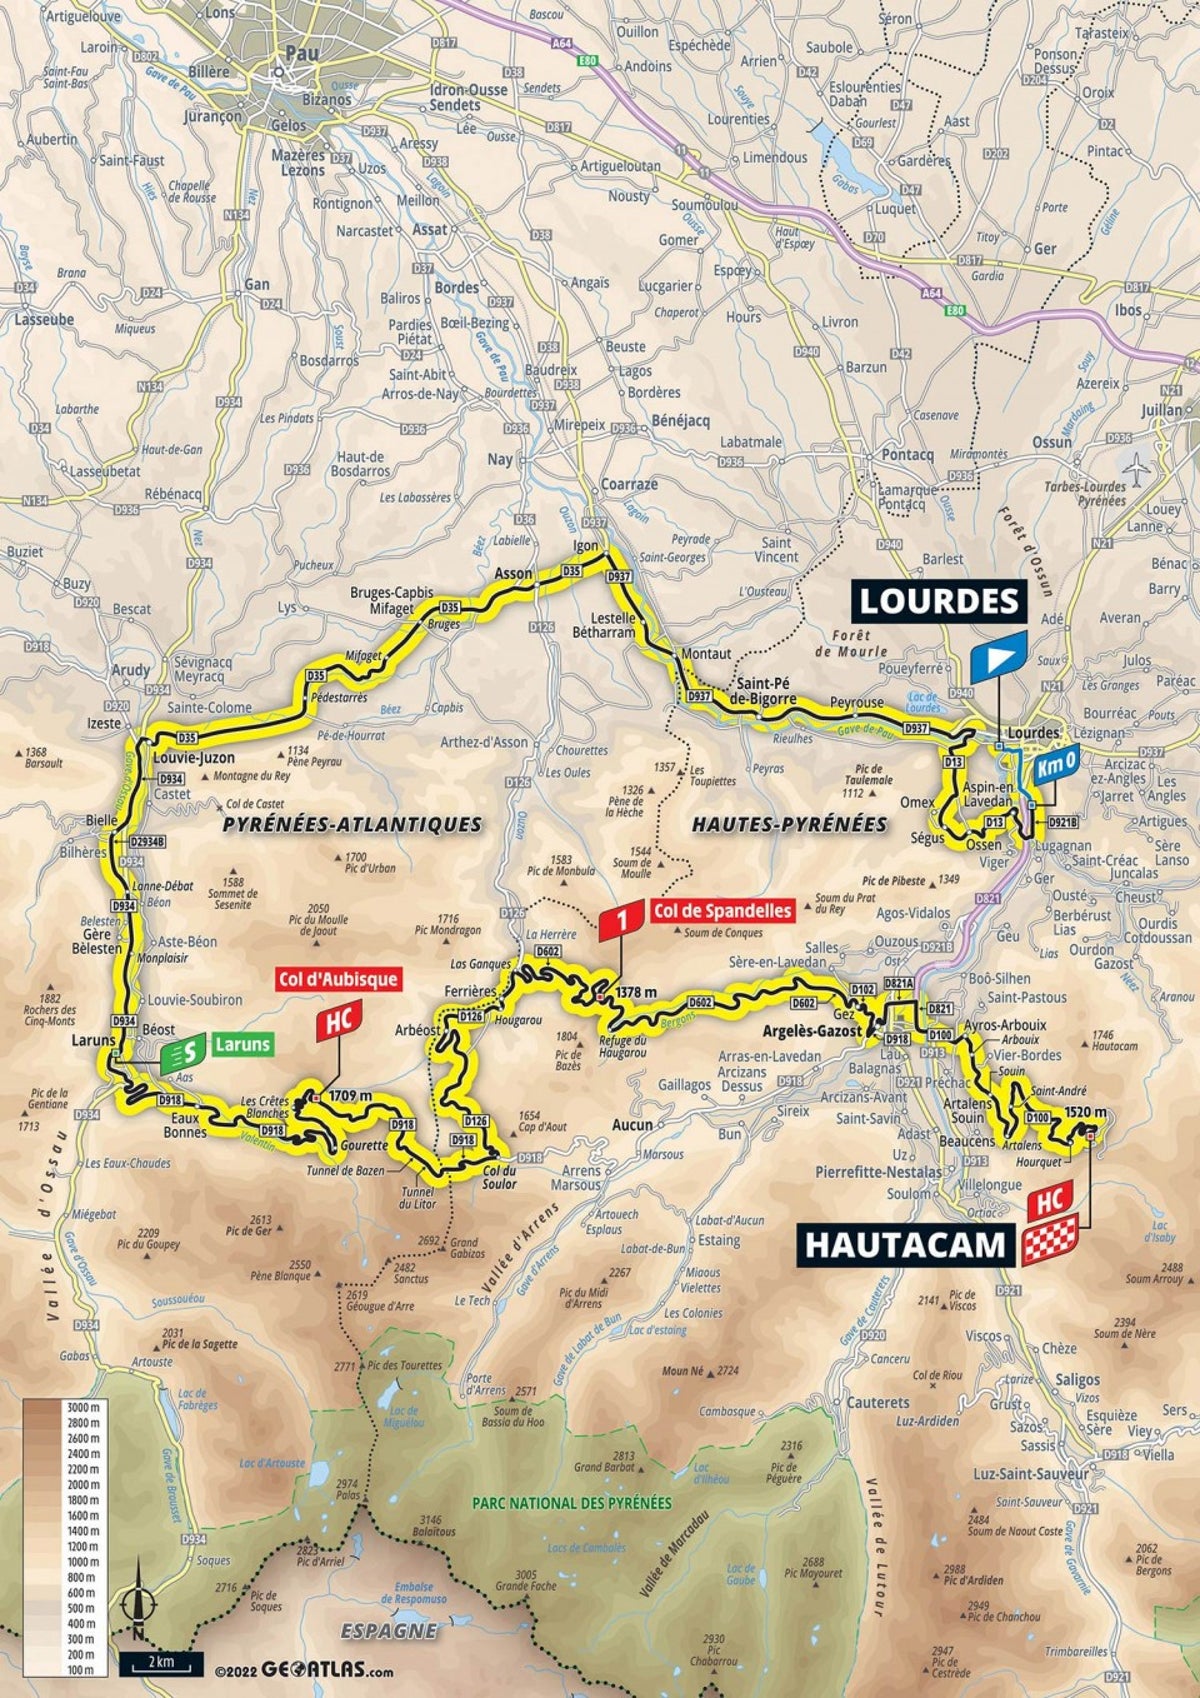 Tour de France 2022 stage 18 preview: Route map and profile of 143km road to Hautacam today